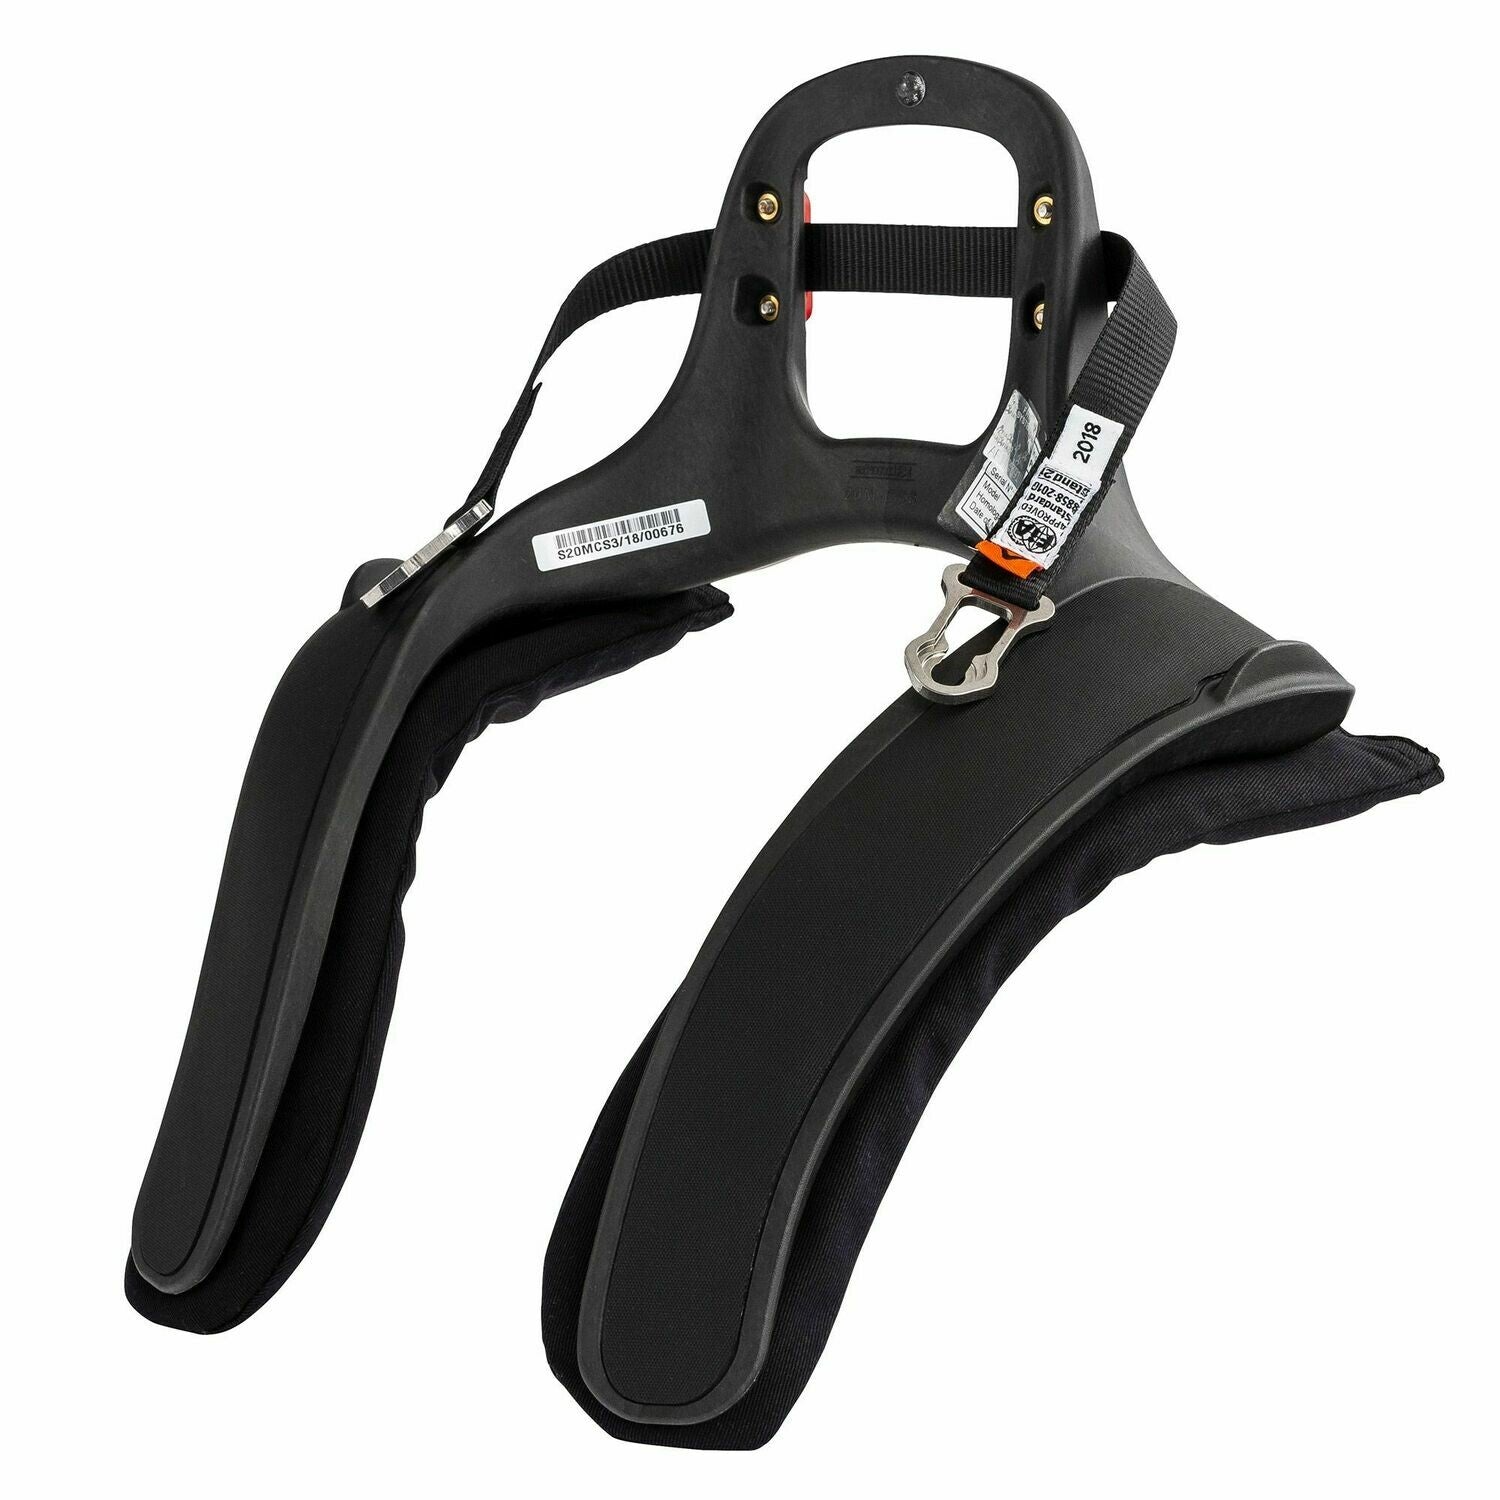 Stand21 Club 3 Series HANS Device